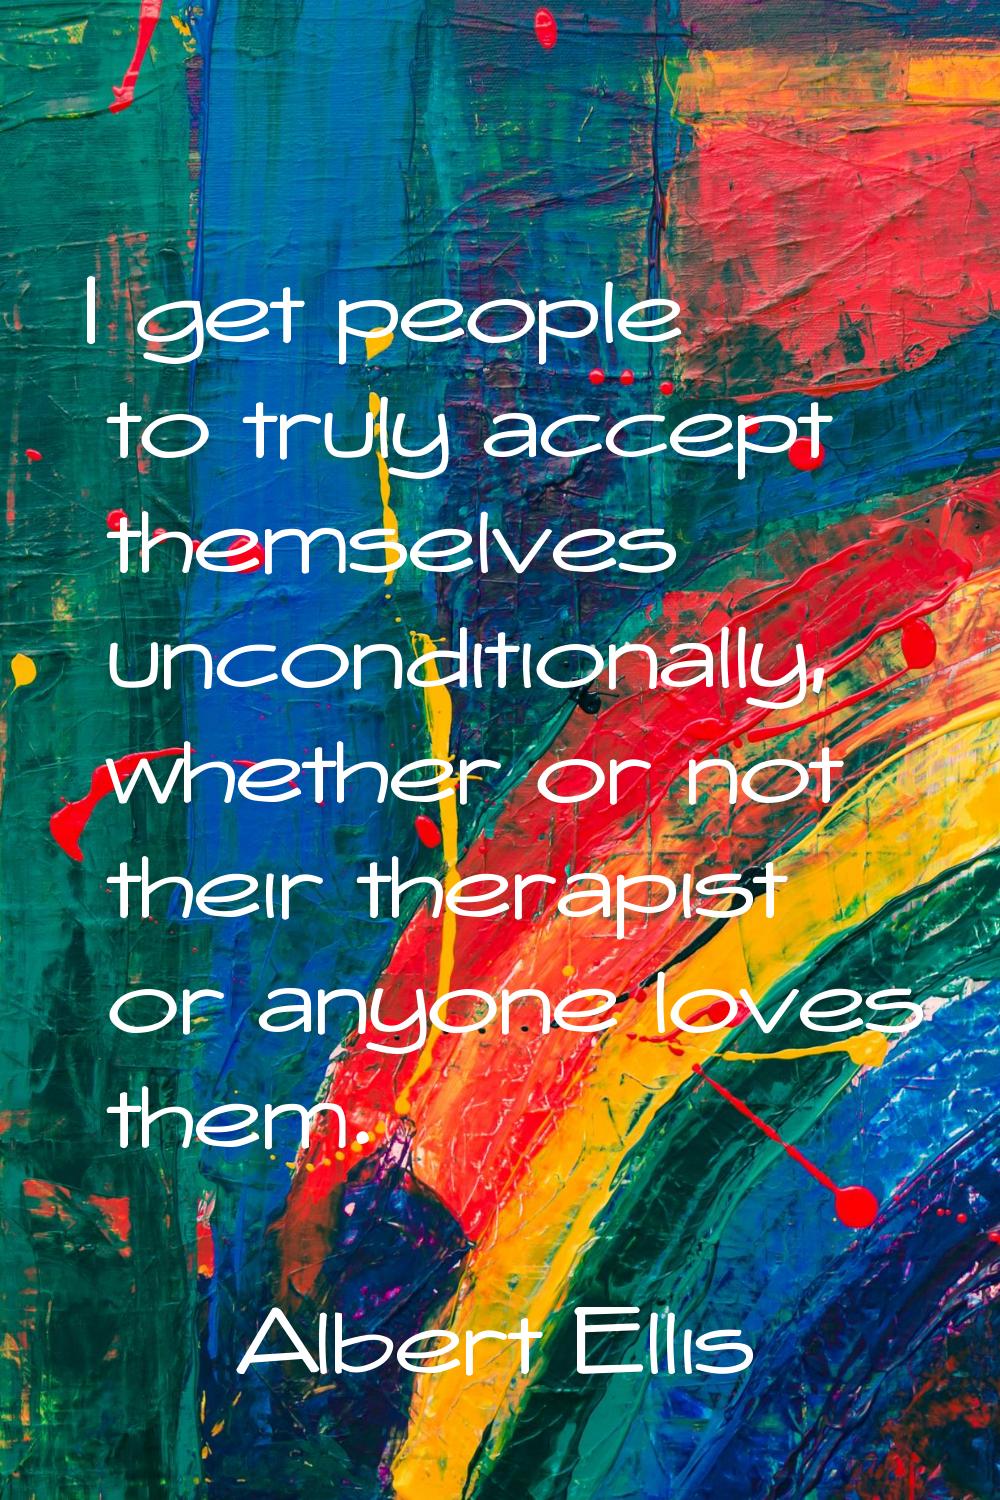 I get people to truly accept themselves unconditionally, whether or not their therapist or anyone l